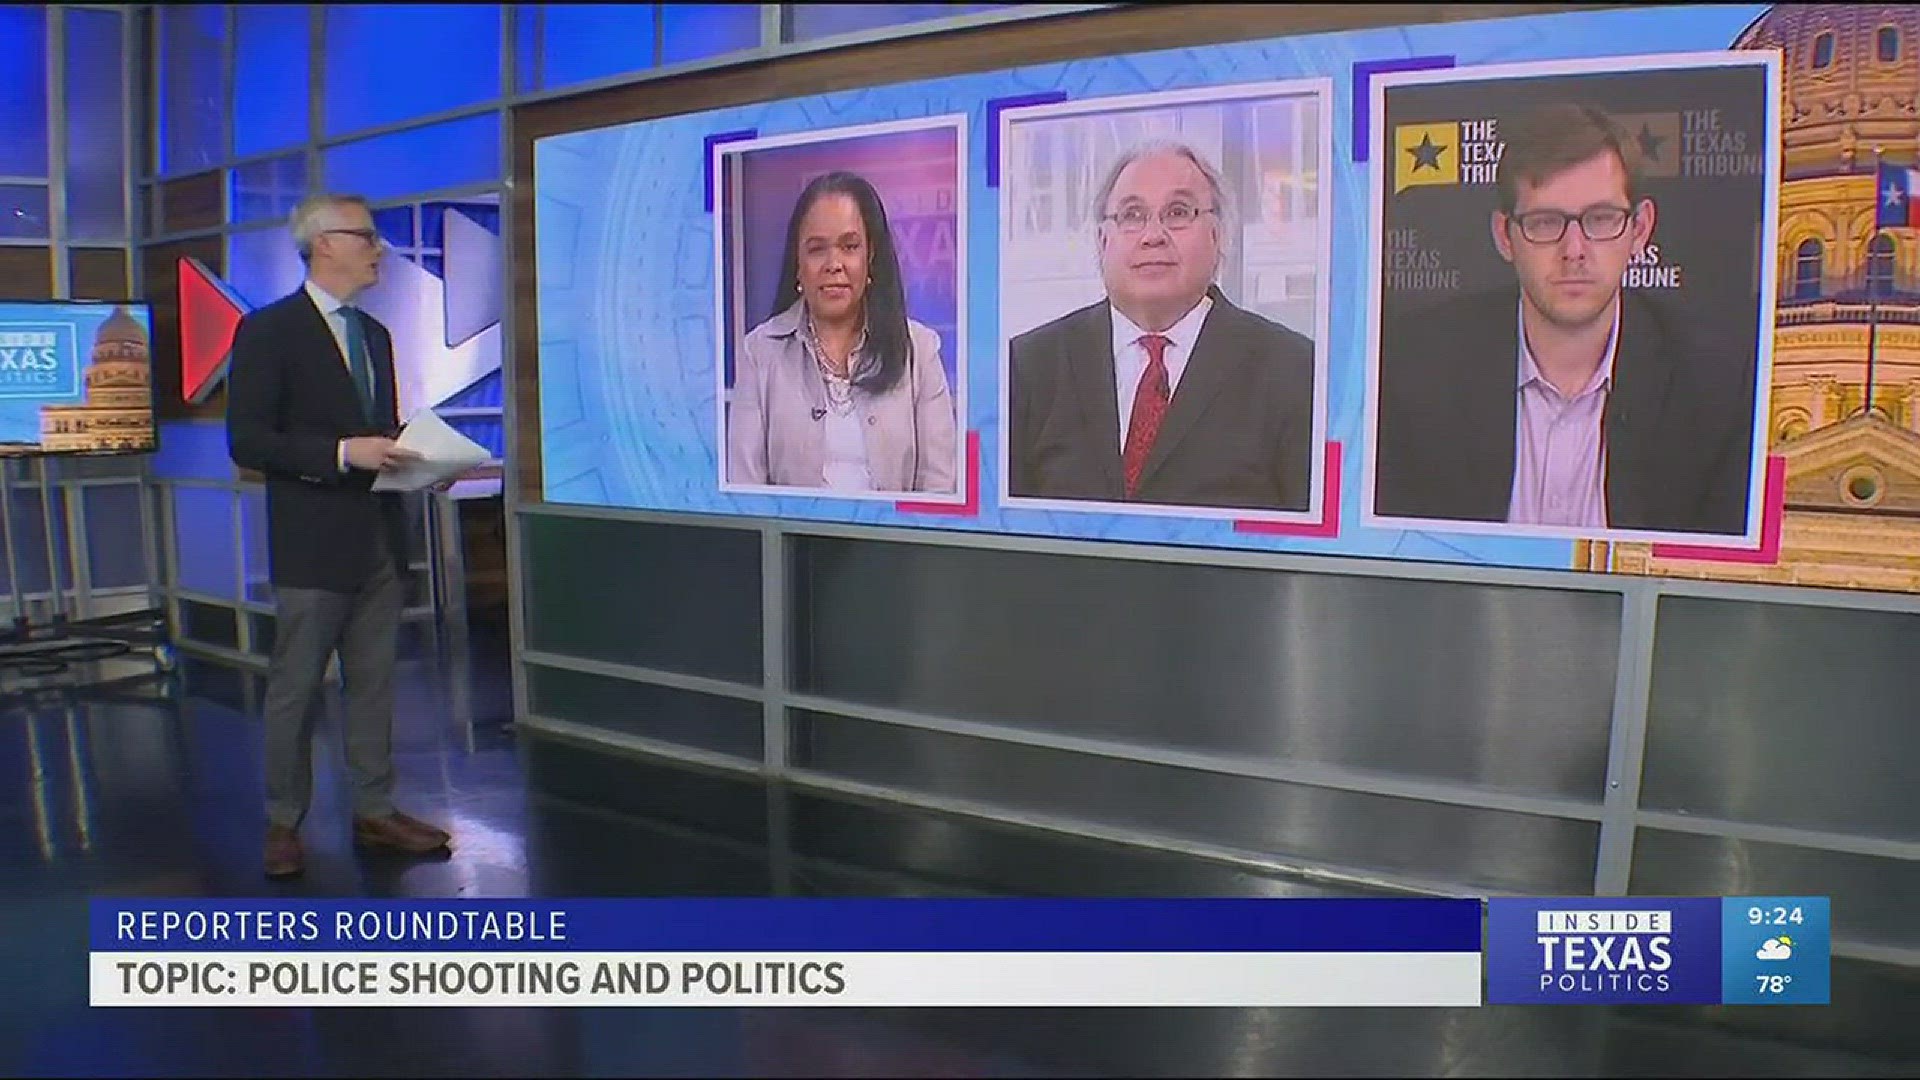 Reporters Roundtable puts the headlines in perspective each week. Patrick and Bud returned along with Berna Dean Steptoe, WFAA's political producer. It was a week of another police shooting, a funeral for an innocent Black man killed by a white police off